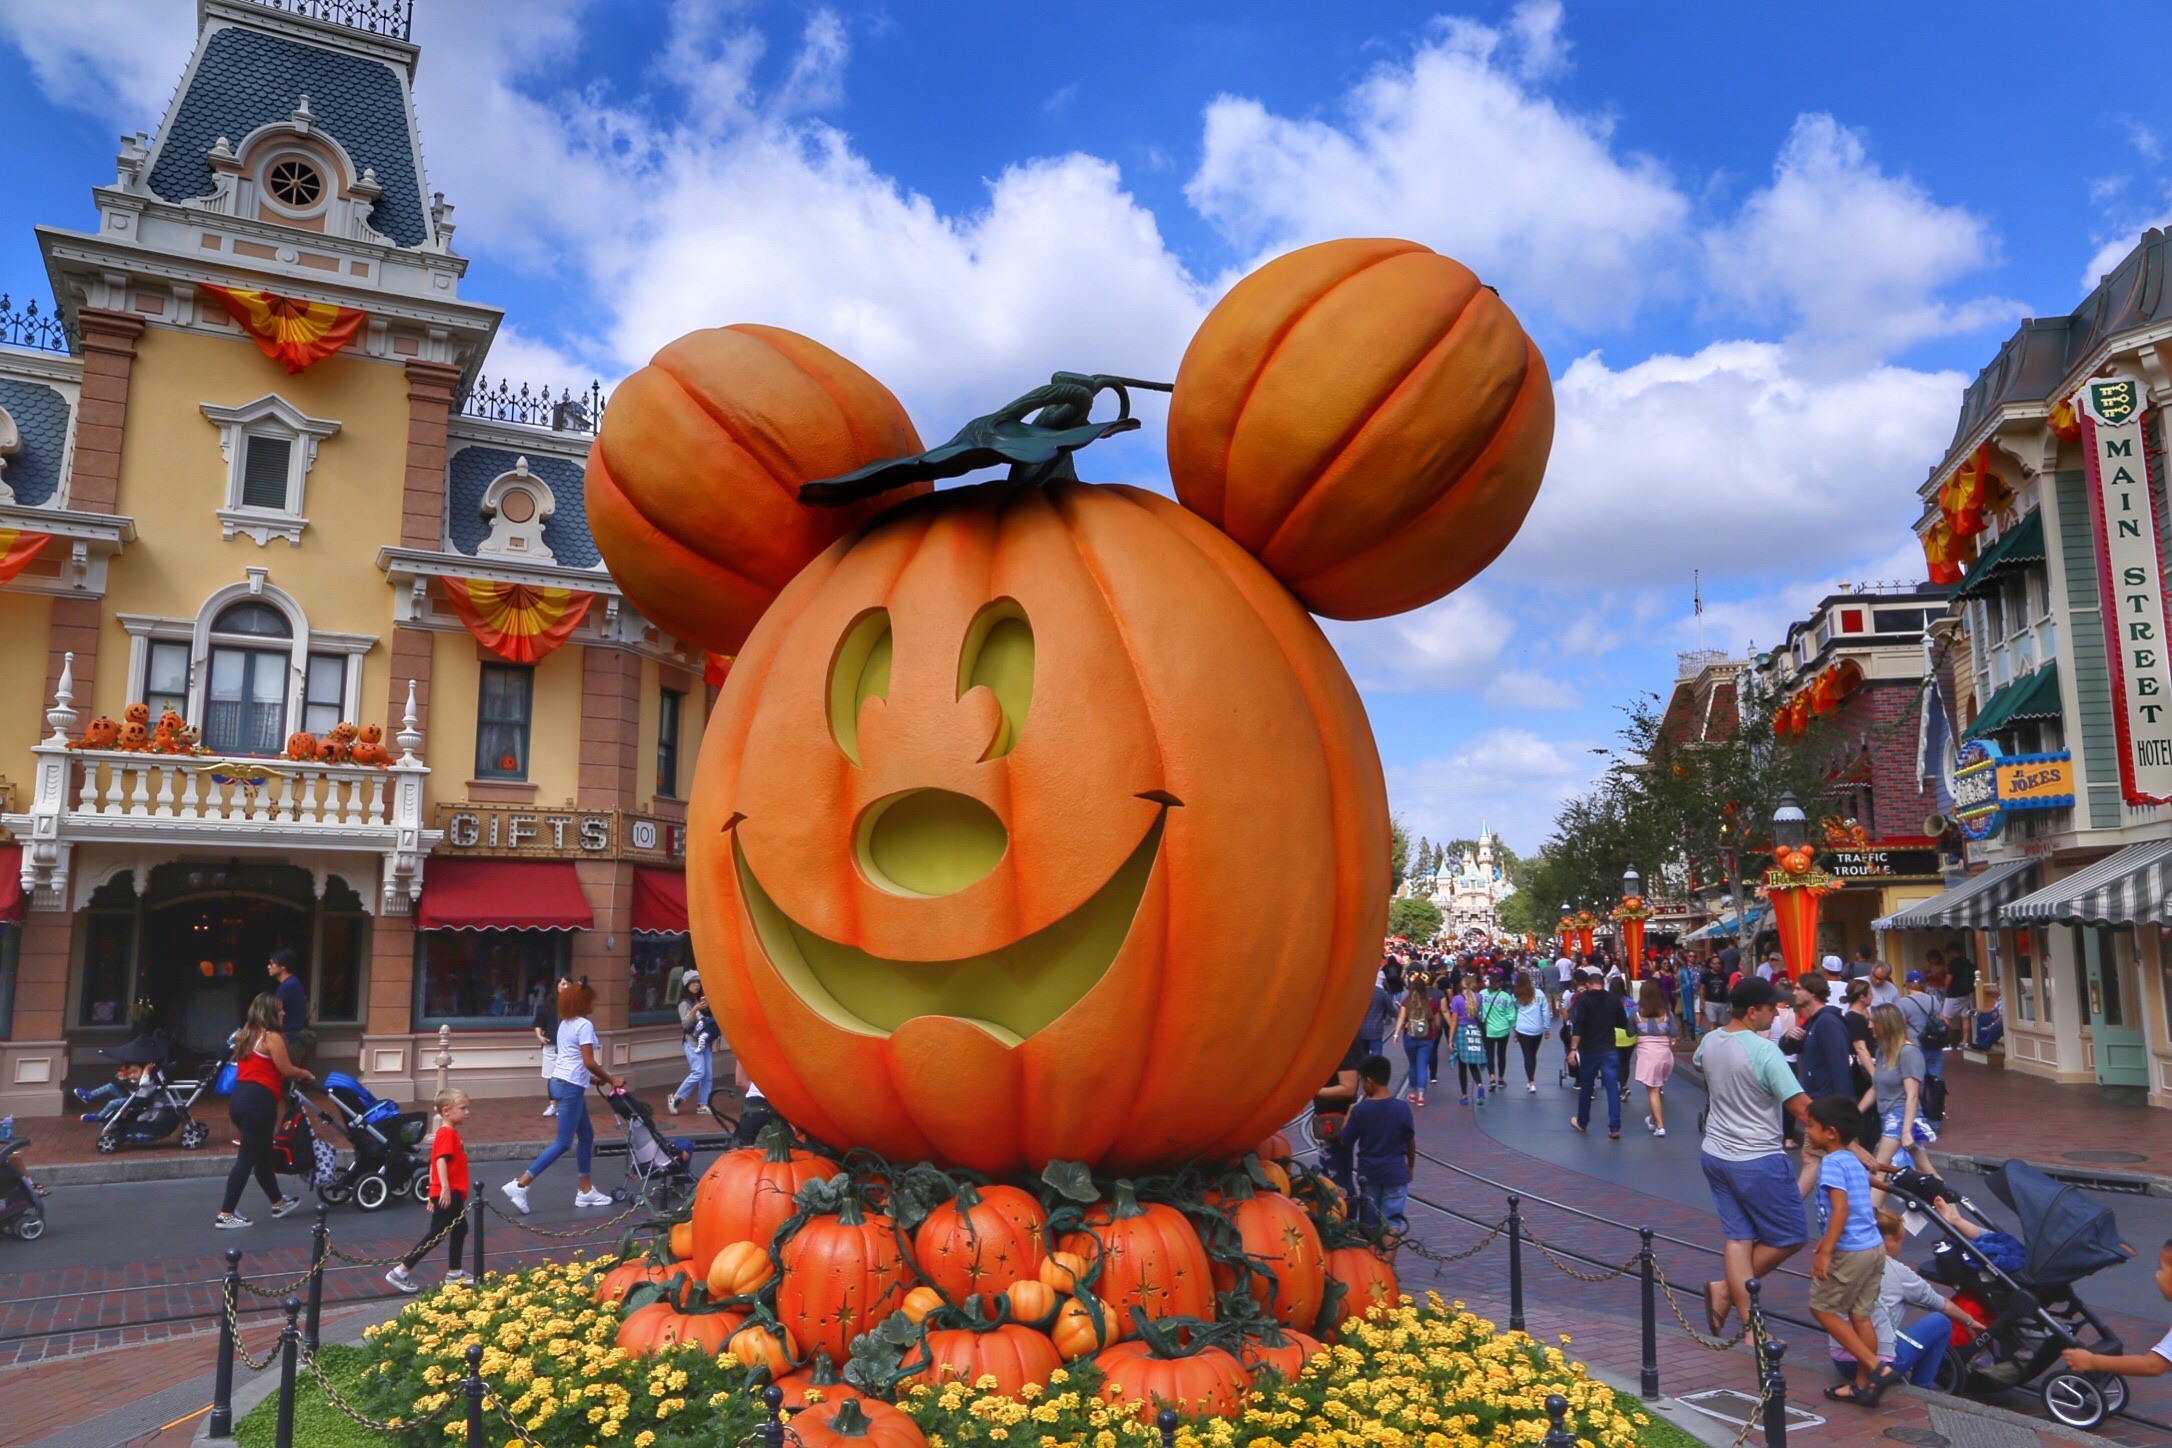 Take a look at Halloween Time at the Disneyland Resort: Photo Report